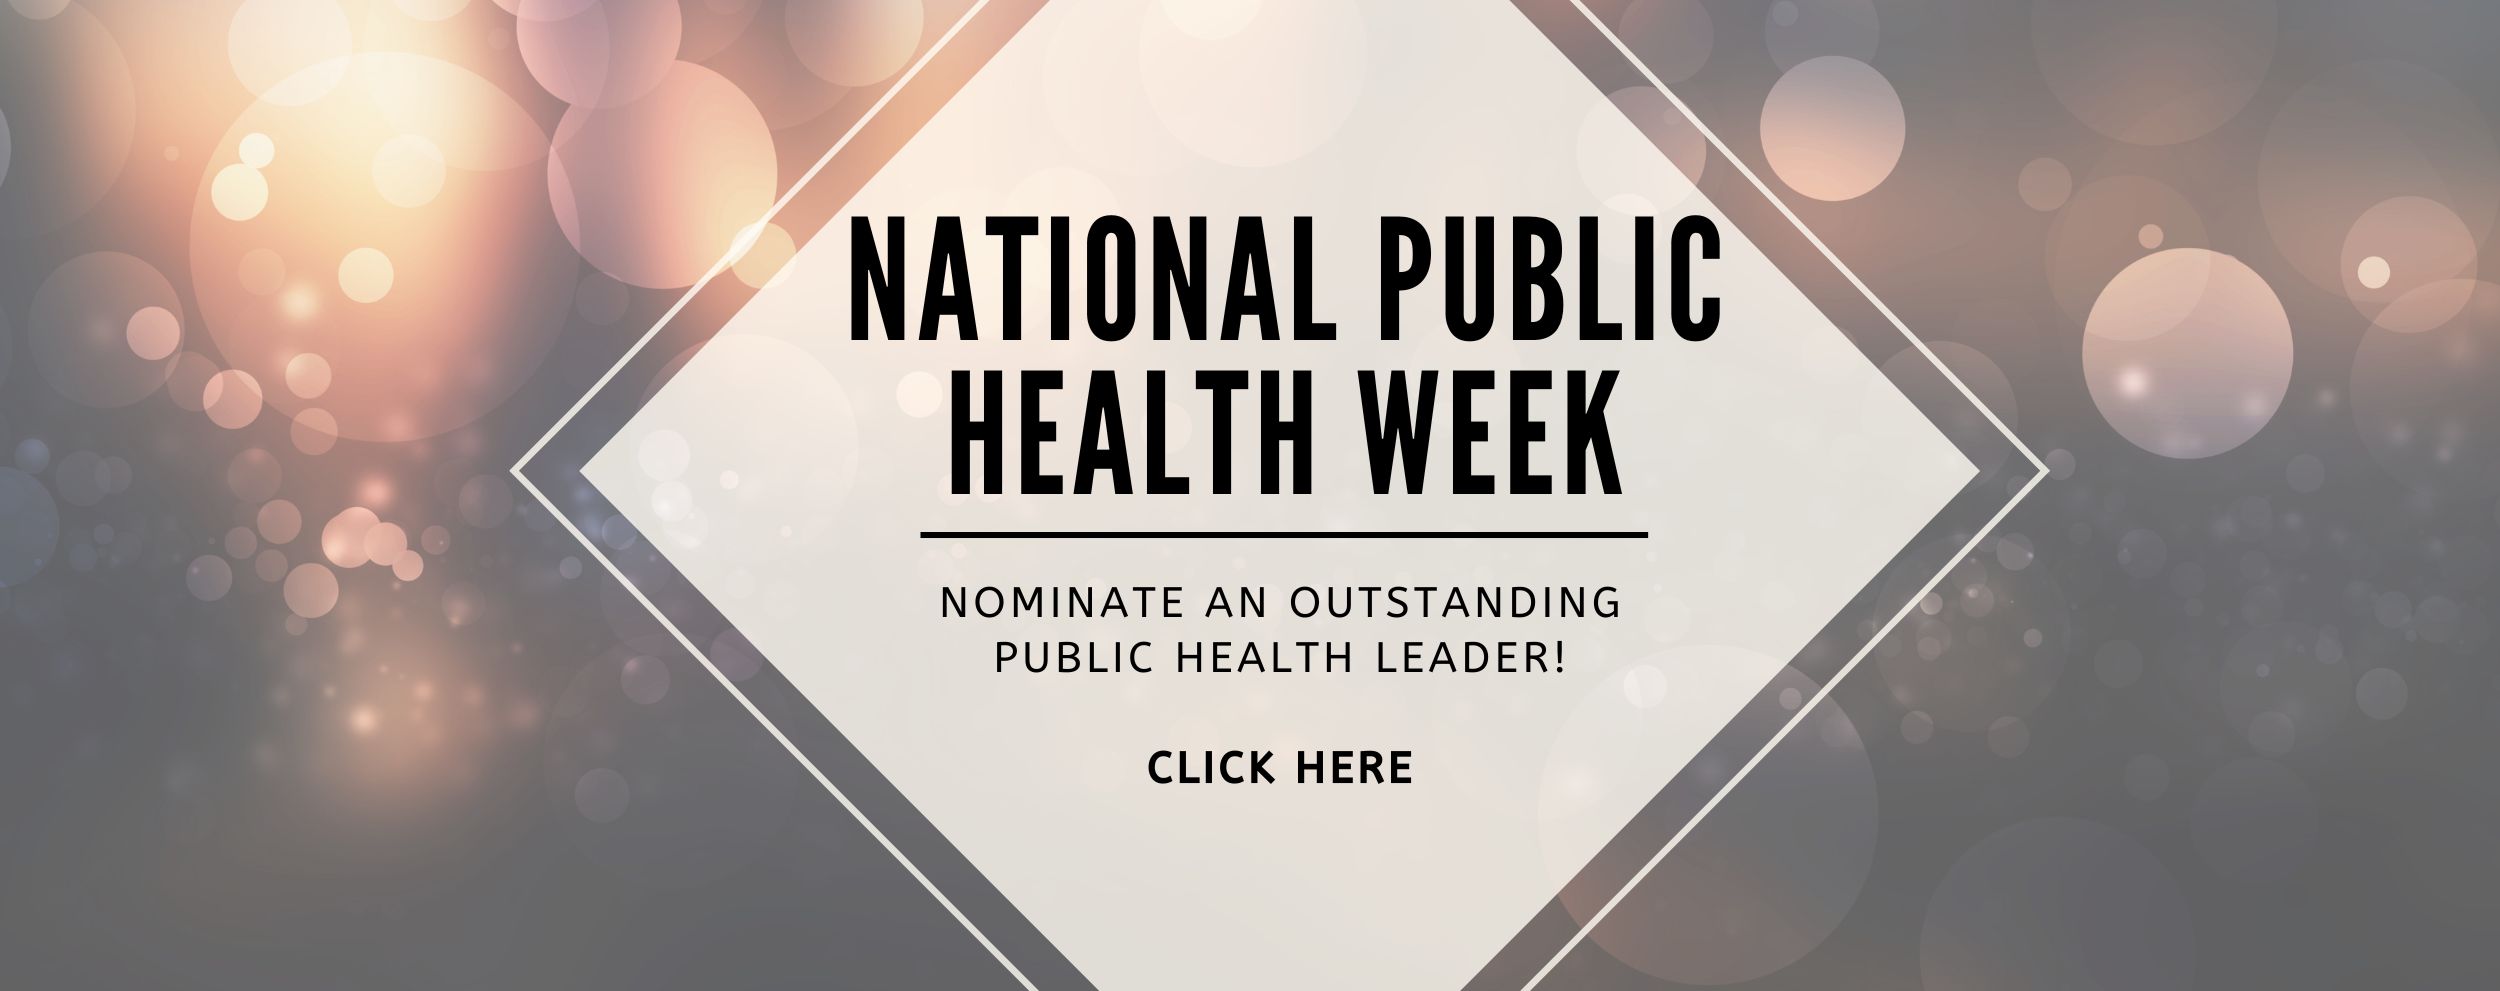 National Public Health Week - Nominate an outstanding public health leader - click here.